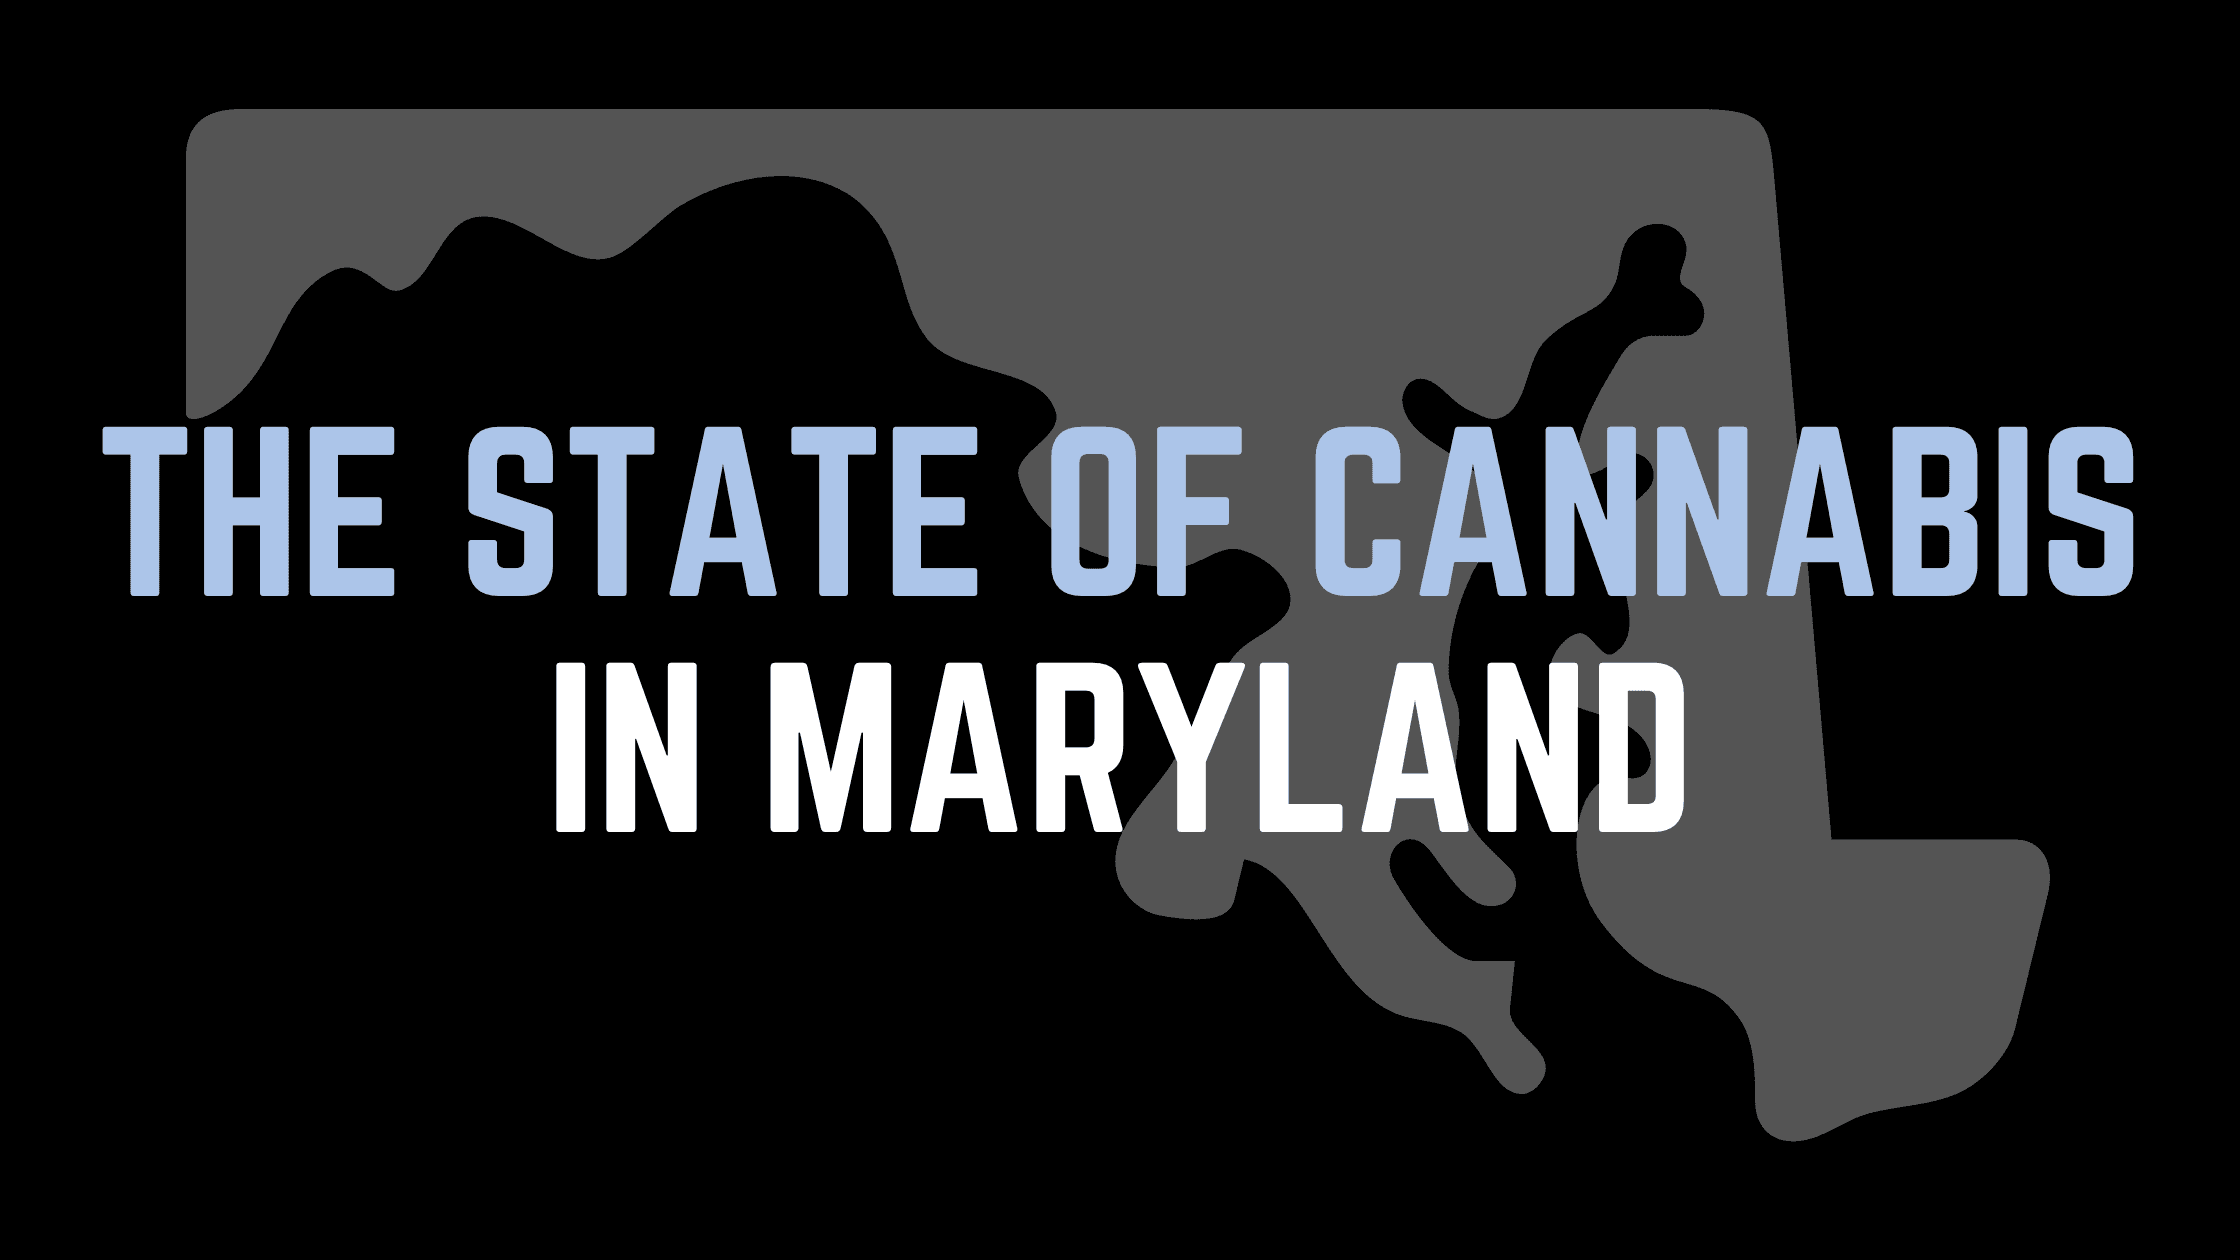 All You Need to Know About Cannabis in Maryland